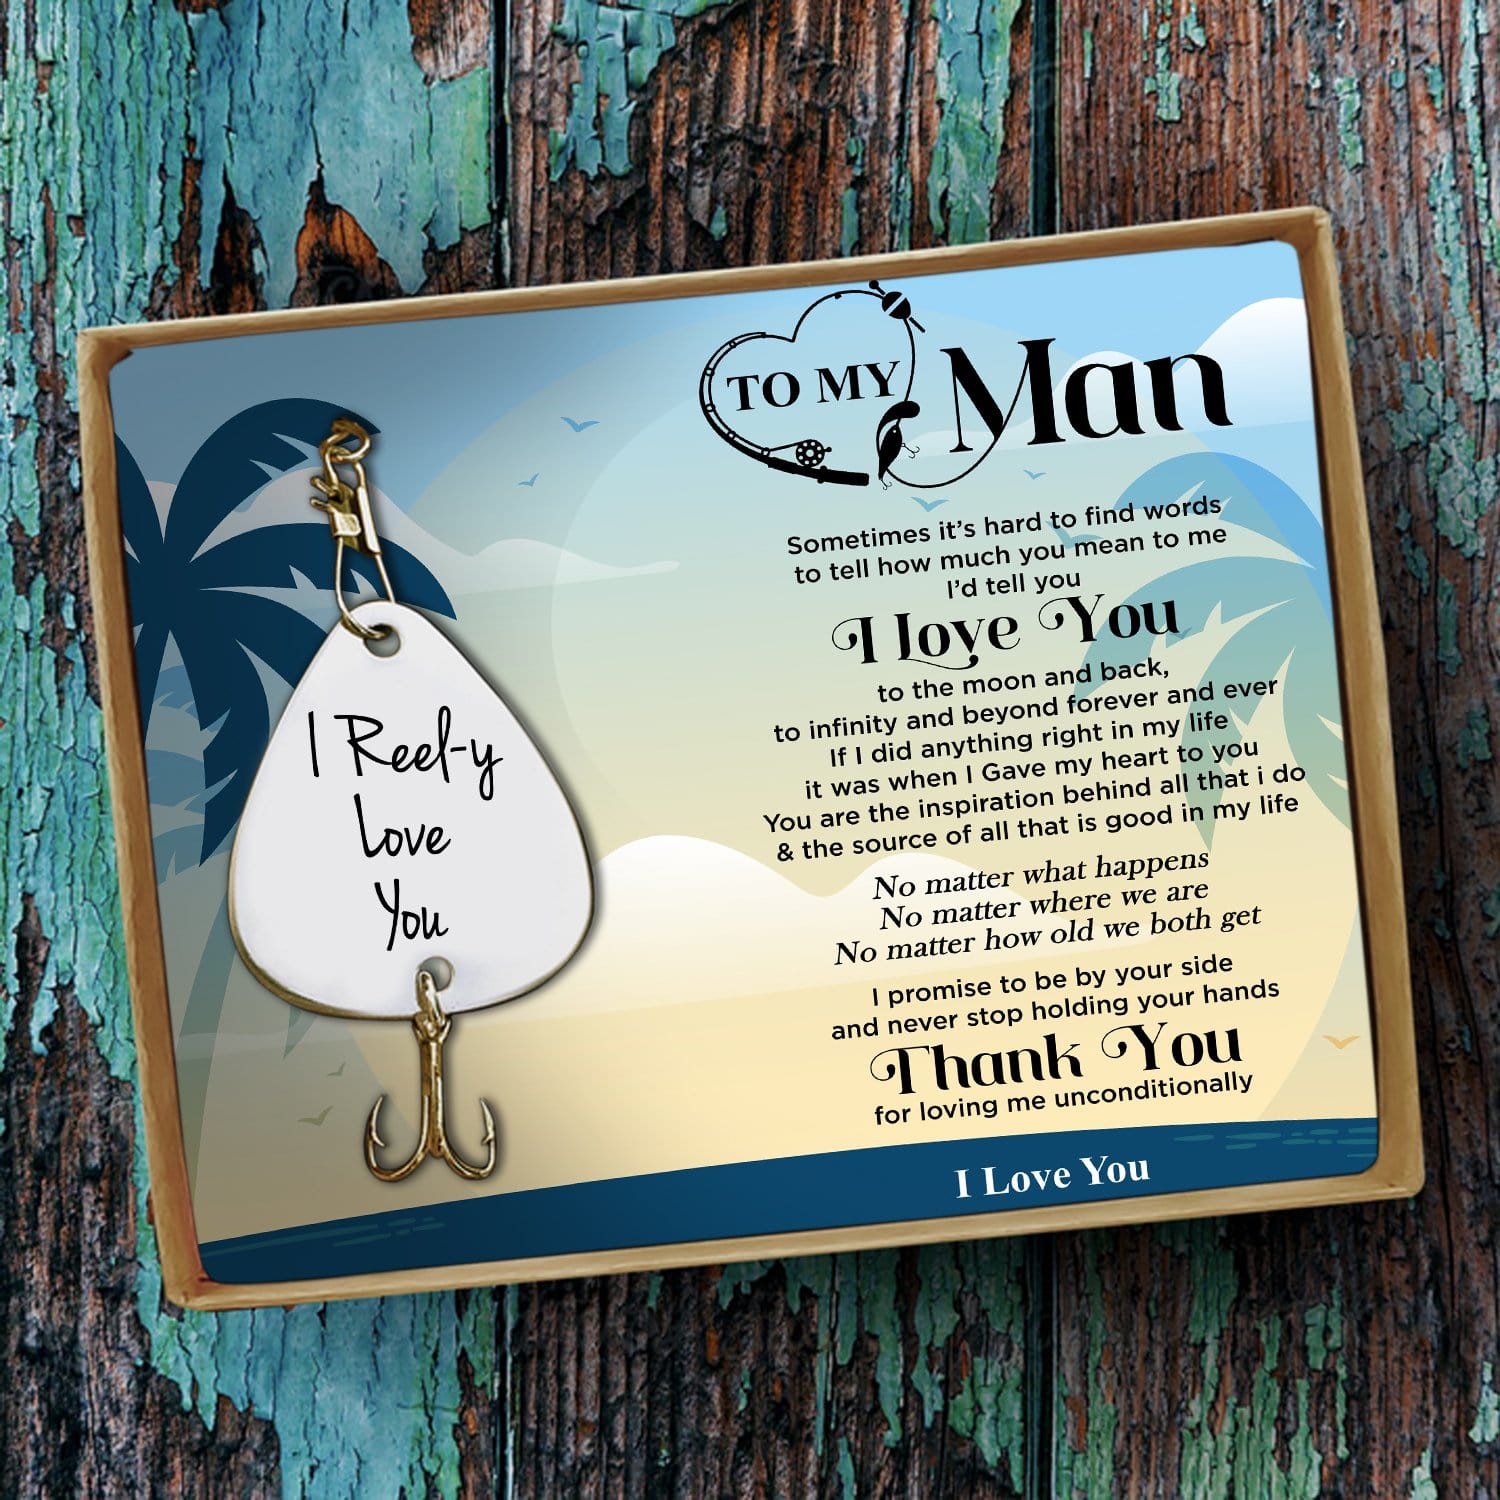 Fishing Hook To My Man - Thank You For Loving Me Unconditionally Engraved Fishing Lure GiveMe-Gifts